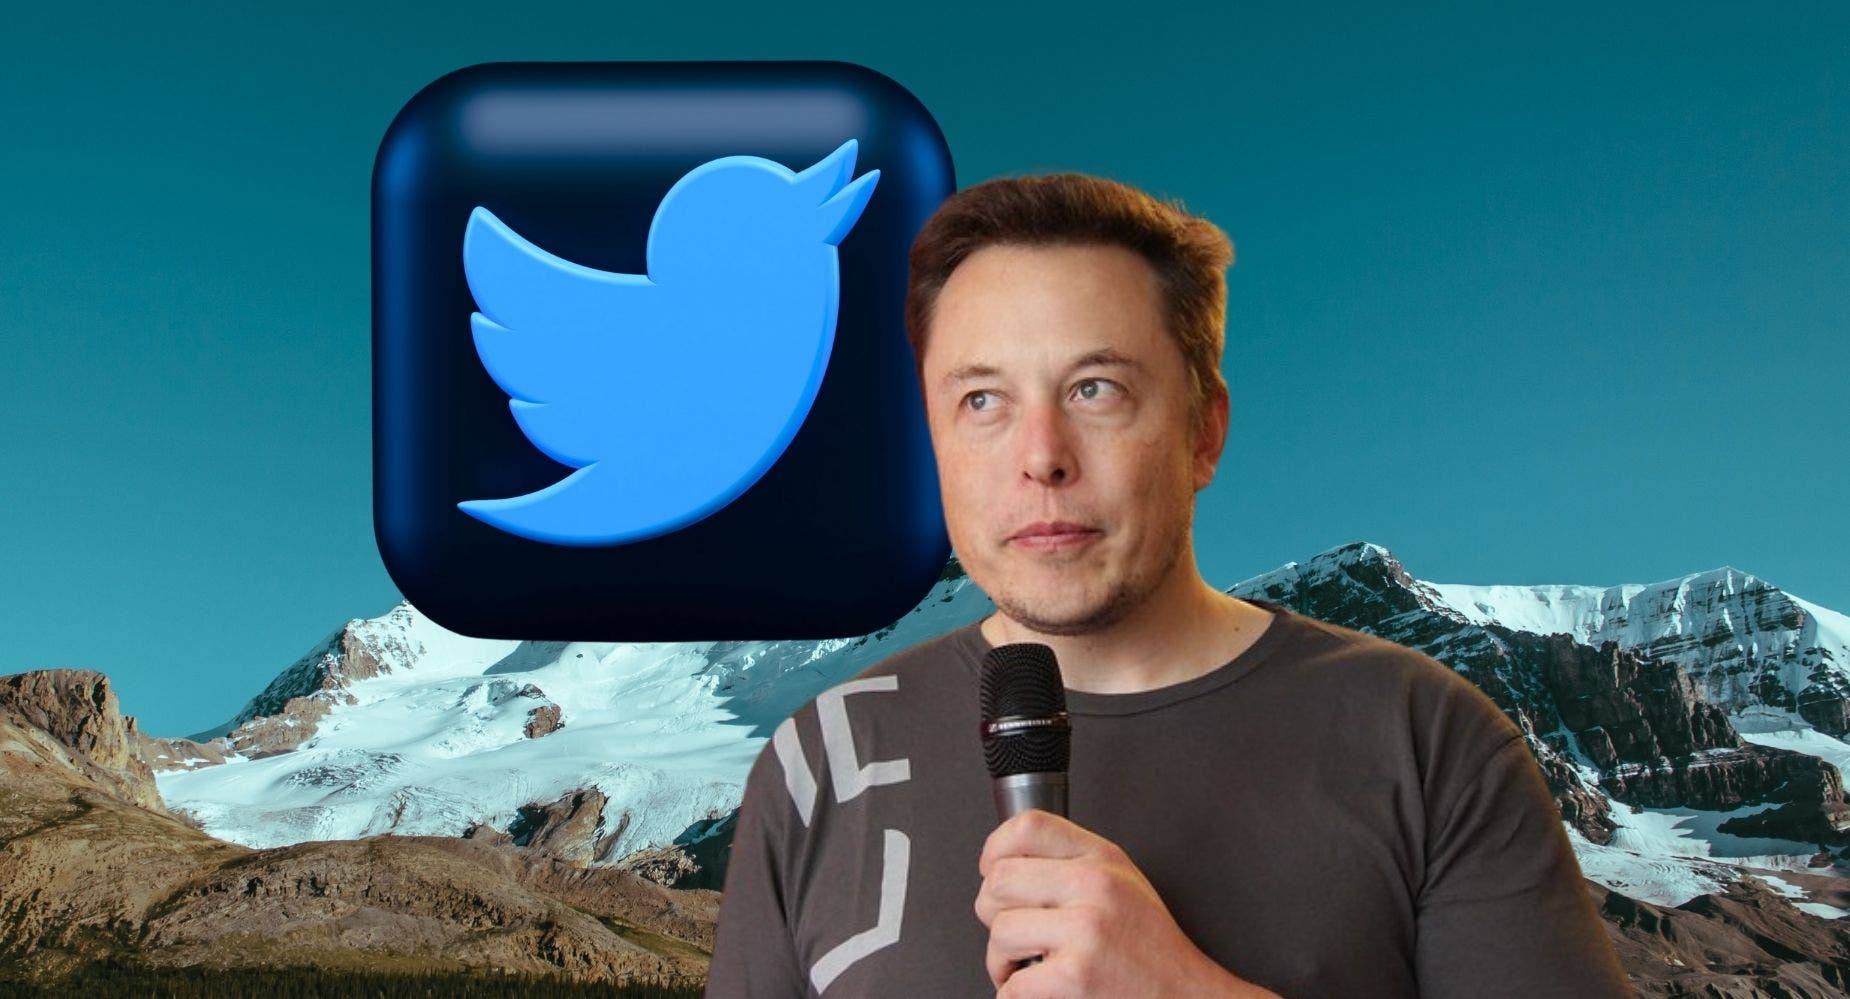 Twitter Users Could Soon See Elon Musk's Monthly Tweet Count: Here's How